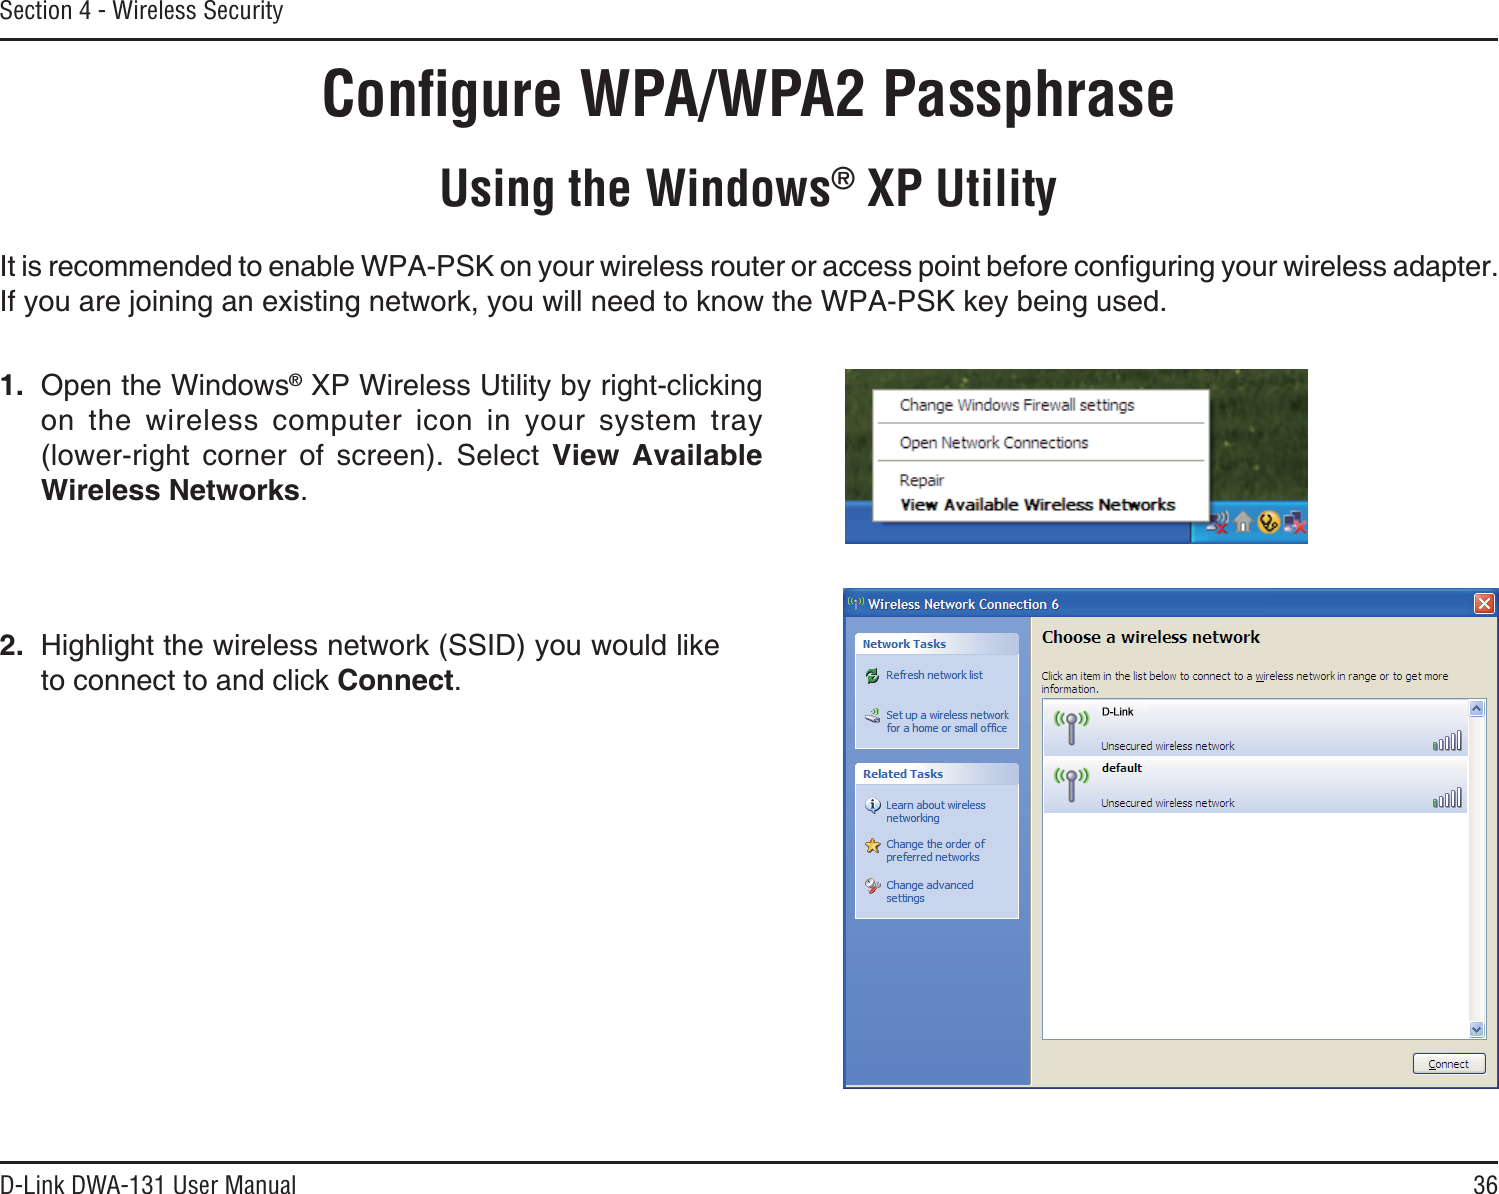 36D-Link DWA-131 User ManualSection 4 - Wireless SecurityConﬁgure WPA/WPA2 PassphraseUsing the Windows® XP Utility+VKUTGEQOOGPFGFVQGPCDNG92#25-QP[QWTYKTGNGUUTQWVGTQTCEEGUURQKPVDGHQTGEQPſIWTKPI[QWTYKTGNGUUCFCRVGTIf you are joining an existing network, you will need to know the WPA-PSK key being used.2. Highlight the wireless network (SSID) you would like to connect to and click Connect.1. Open the Windows® XP Wireless Utility by right-clicking on the wireless computer icon in your system tray (lower-right corner of screen). Select View Available Wireless Networks.